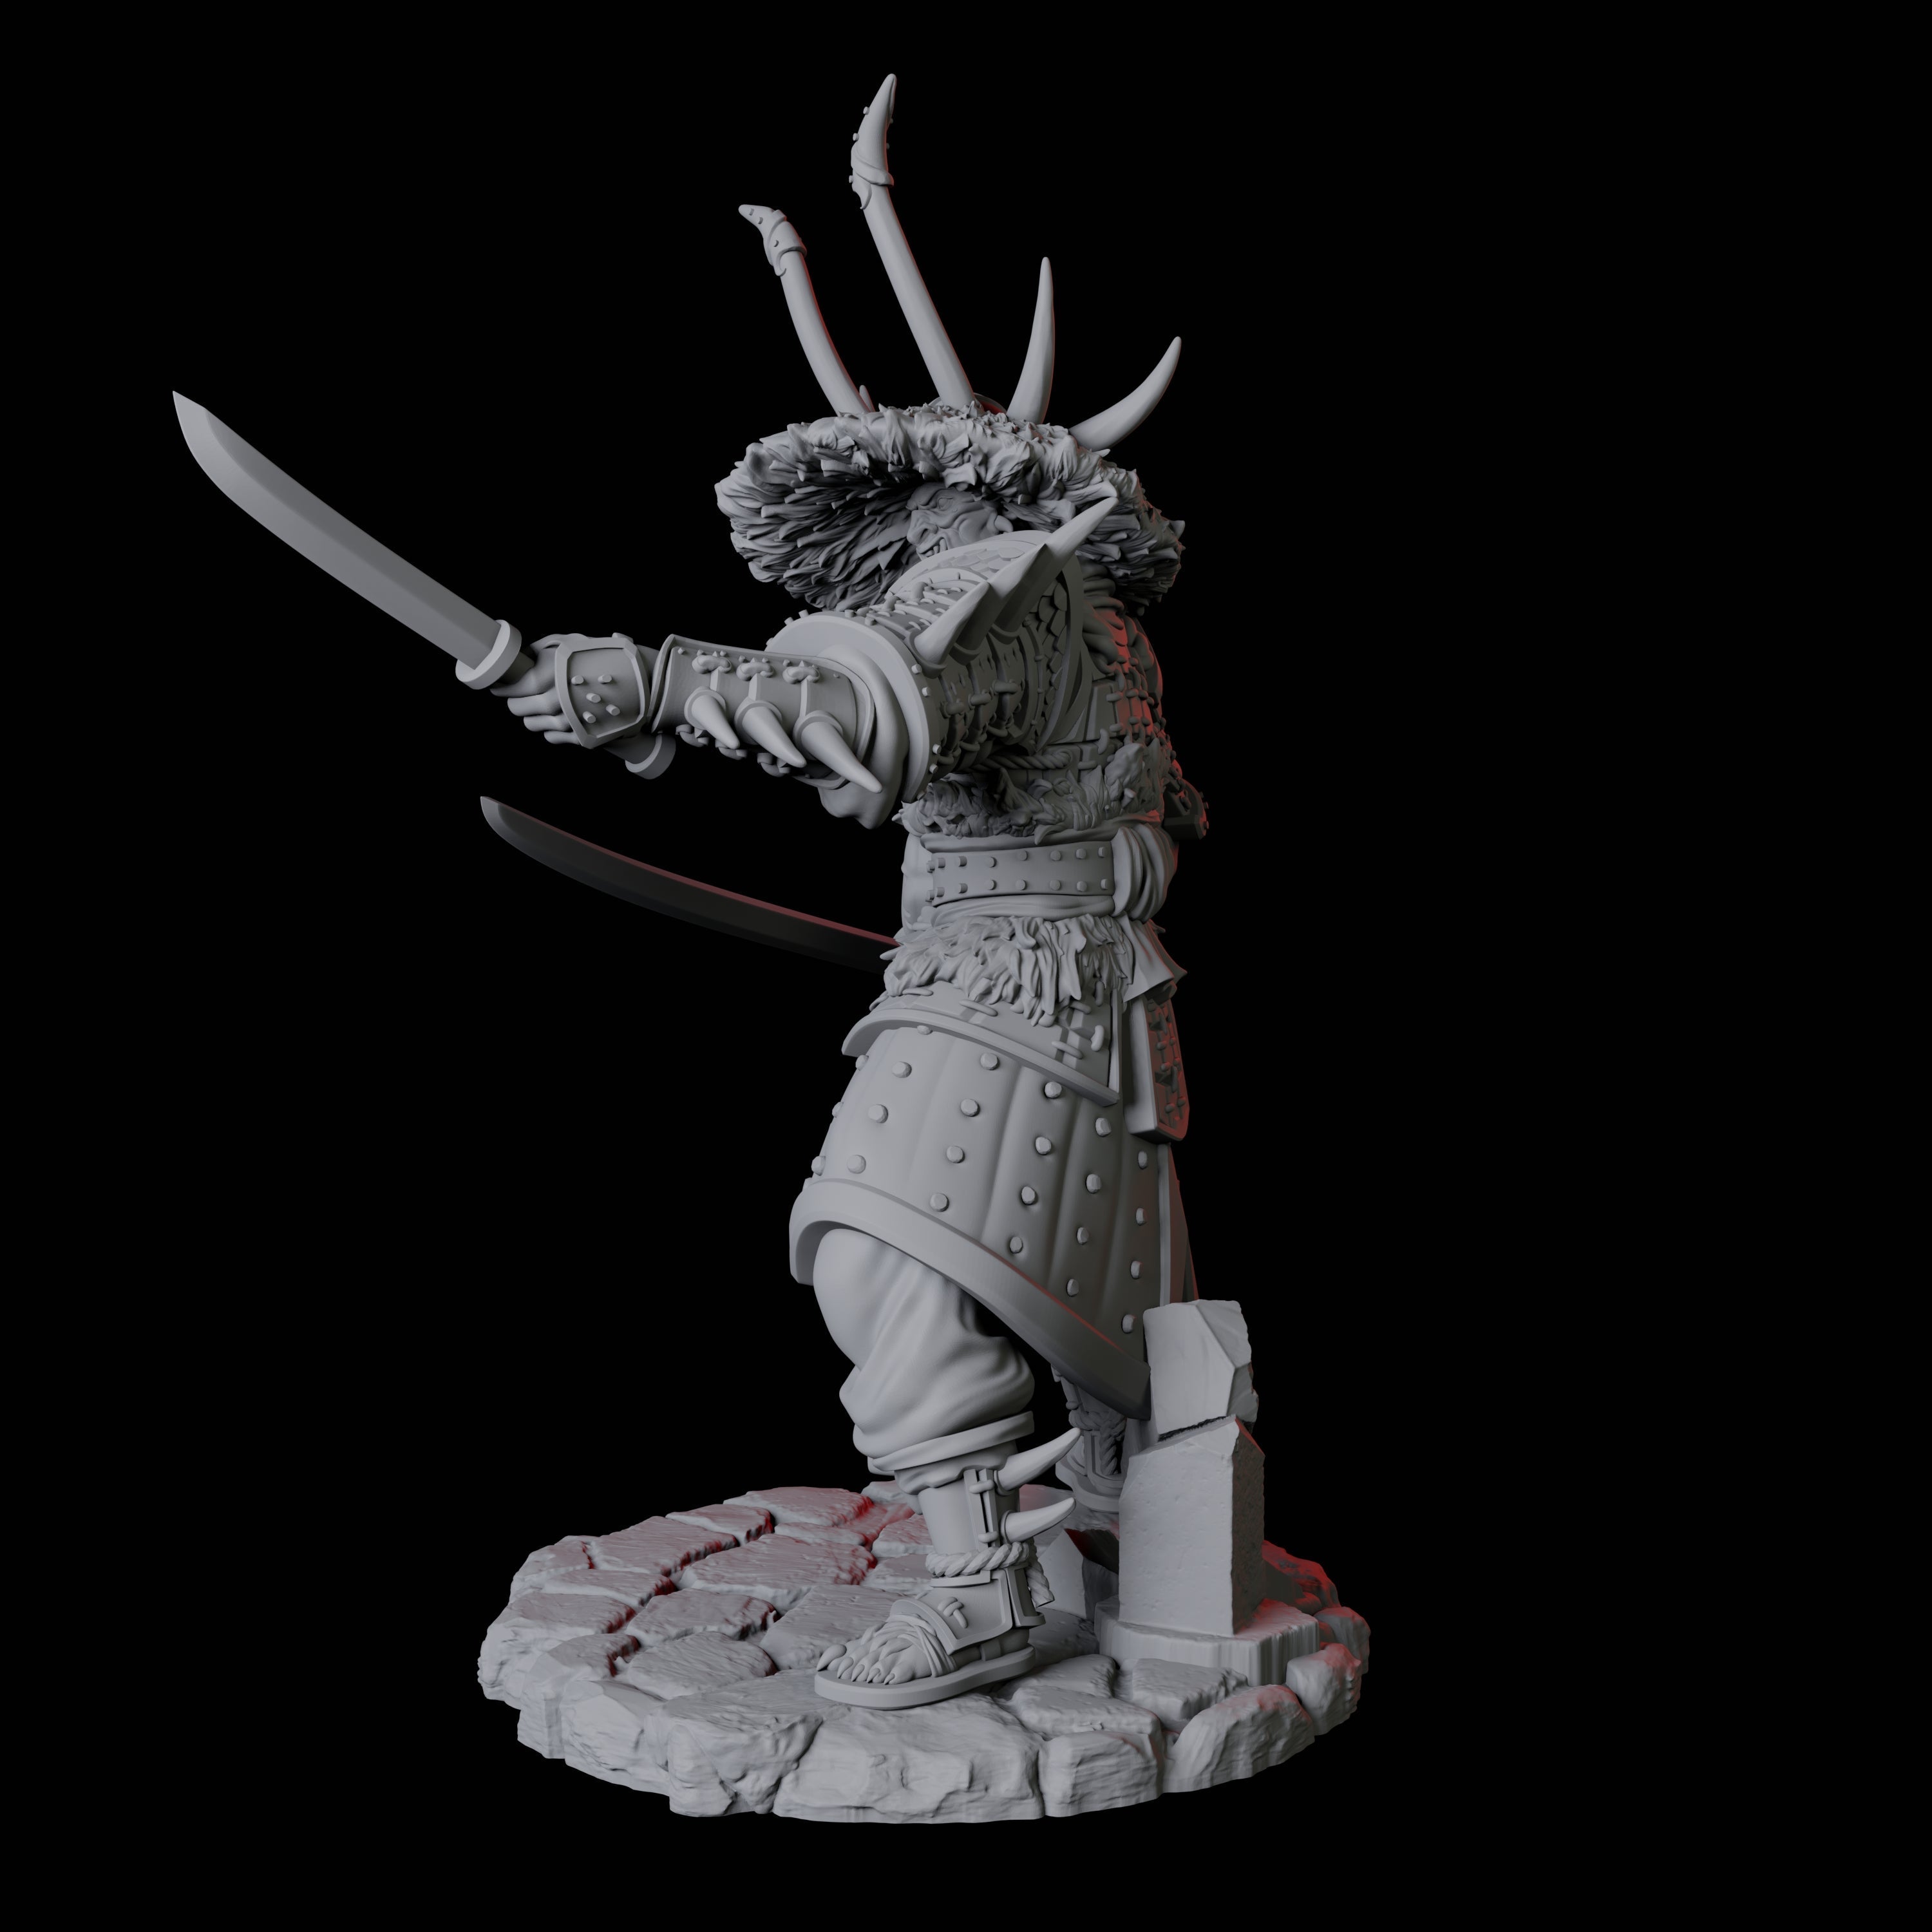 Oni Death Samurai A Miniature for Dungeons and Dragons, Pathfinder or other TTRPGs